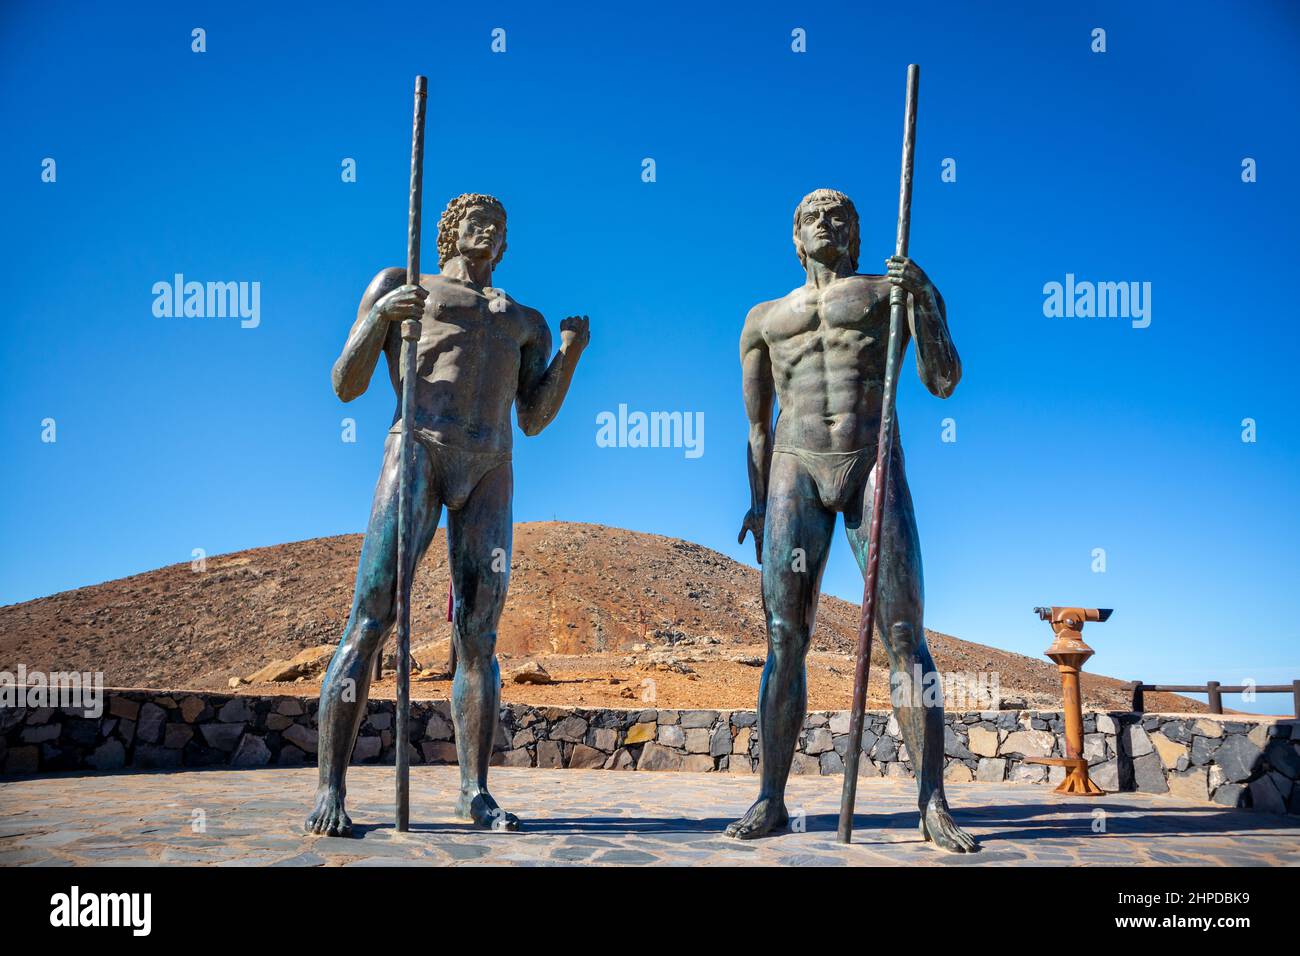 Statues of Guise and Ayose, first kings of Fuerteventura, full body statues, Canary Islands, Spain Stock Photo